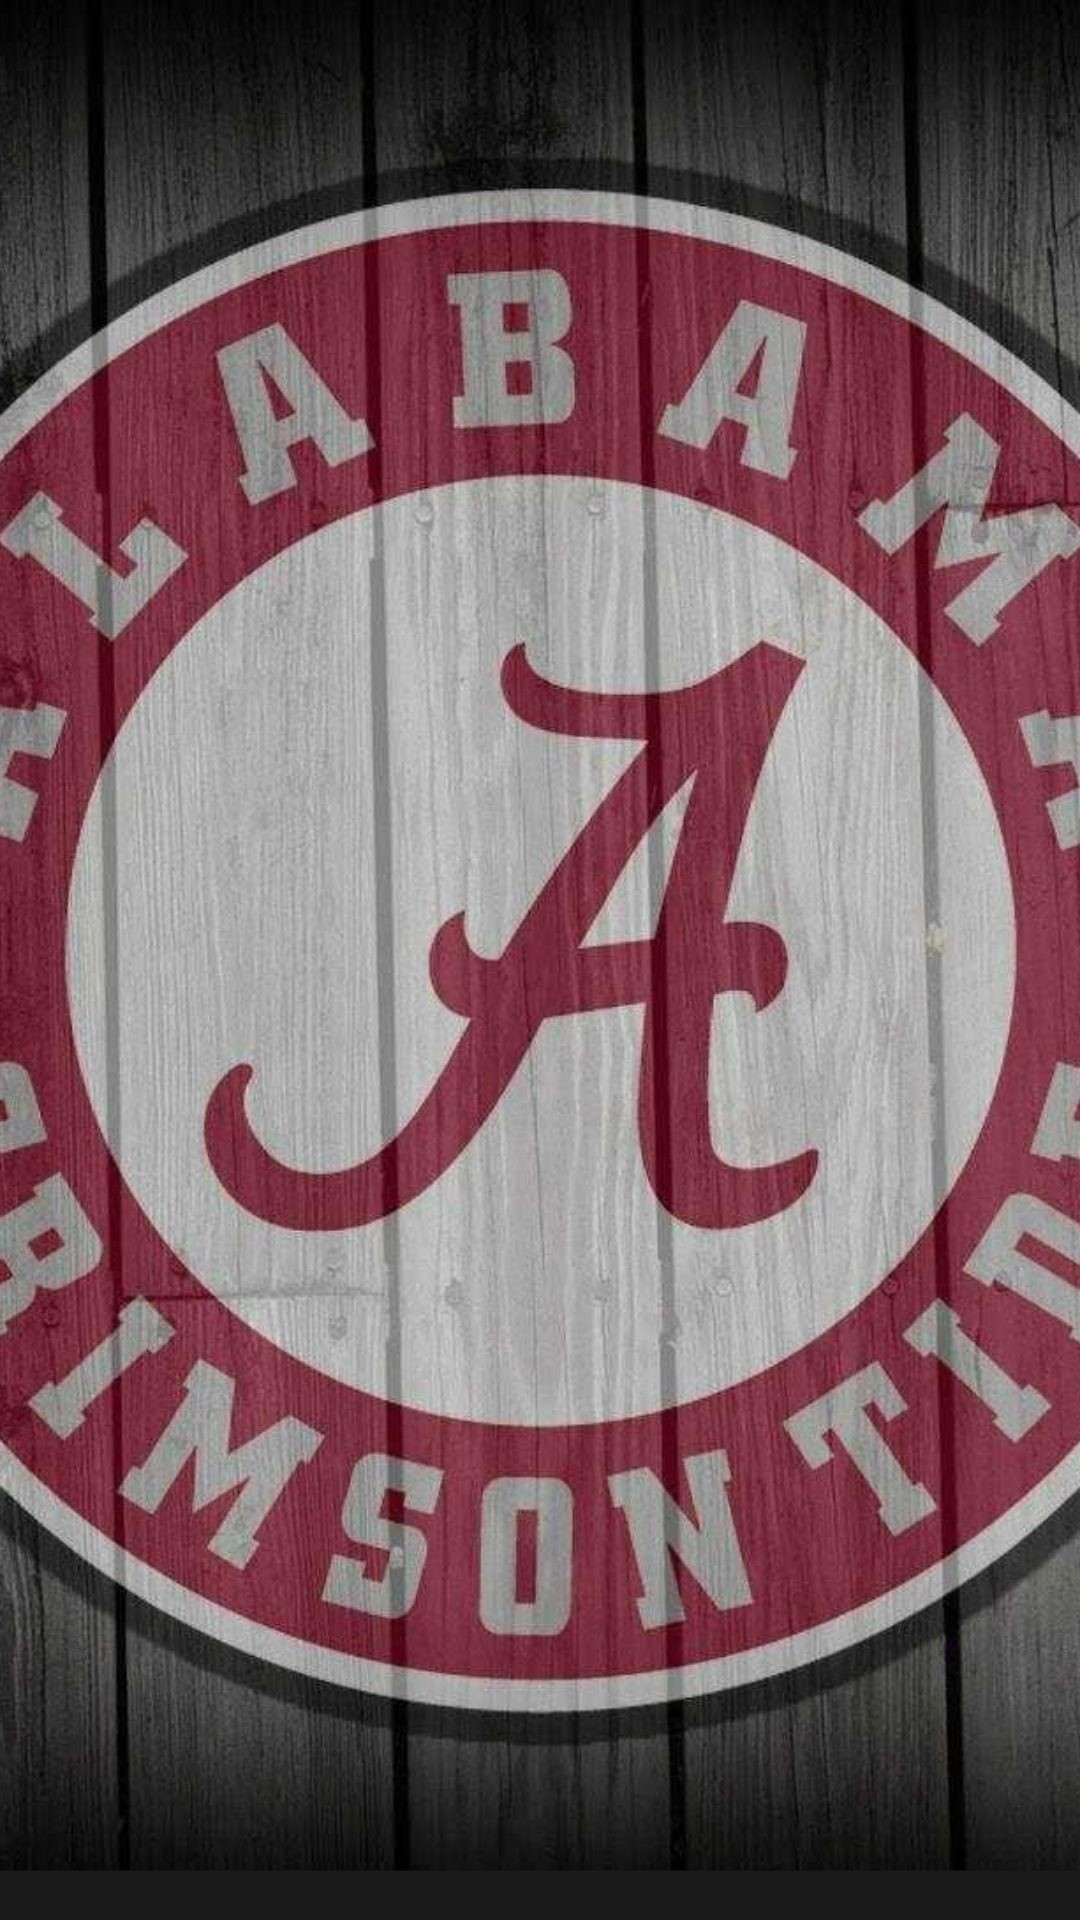 1080x1920 Alabama Football Background Hd Wallpapers Download